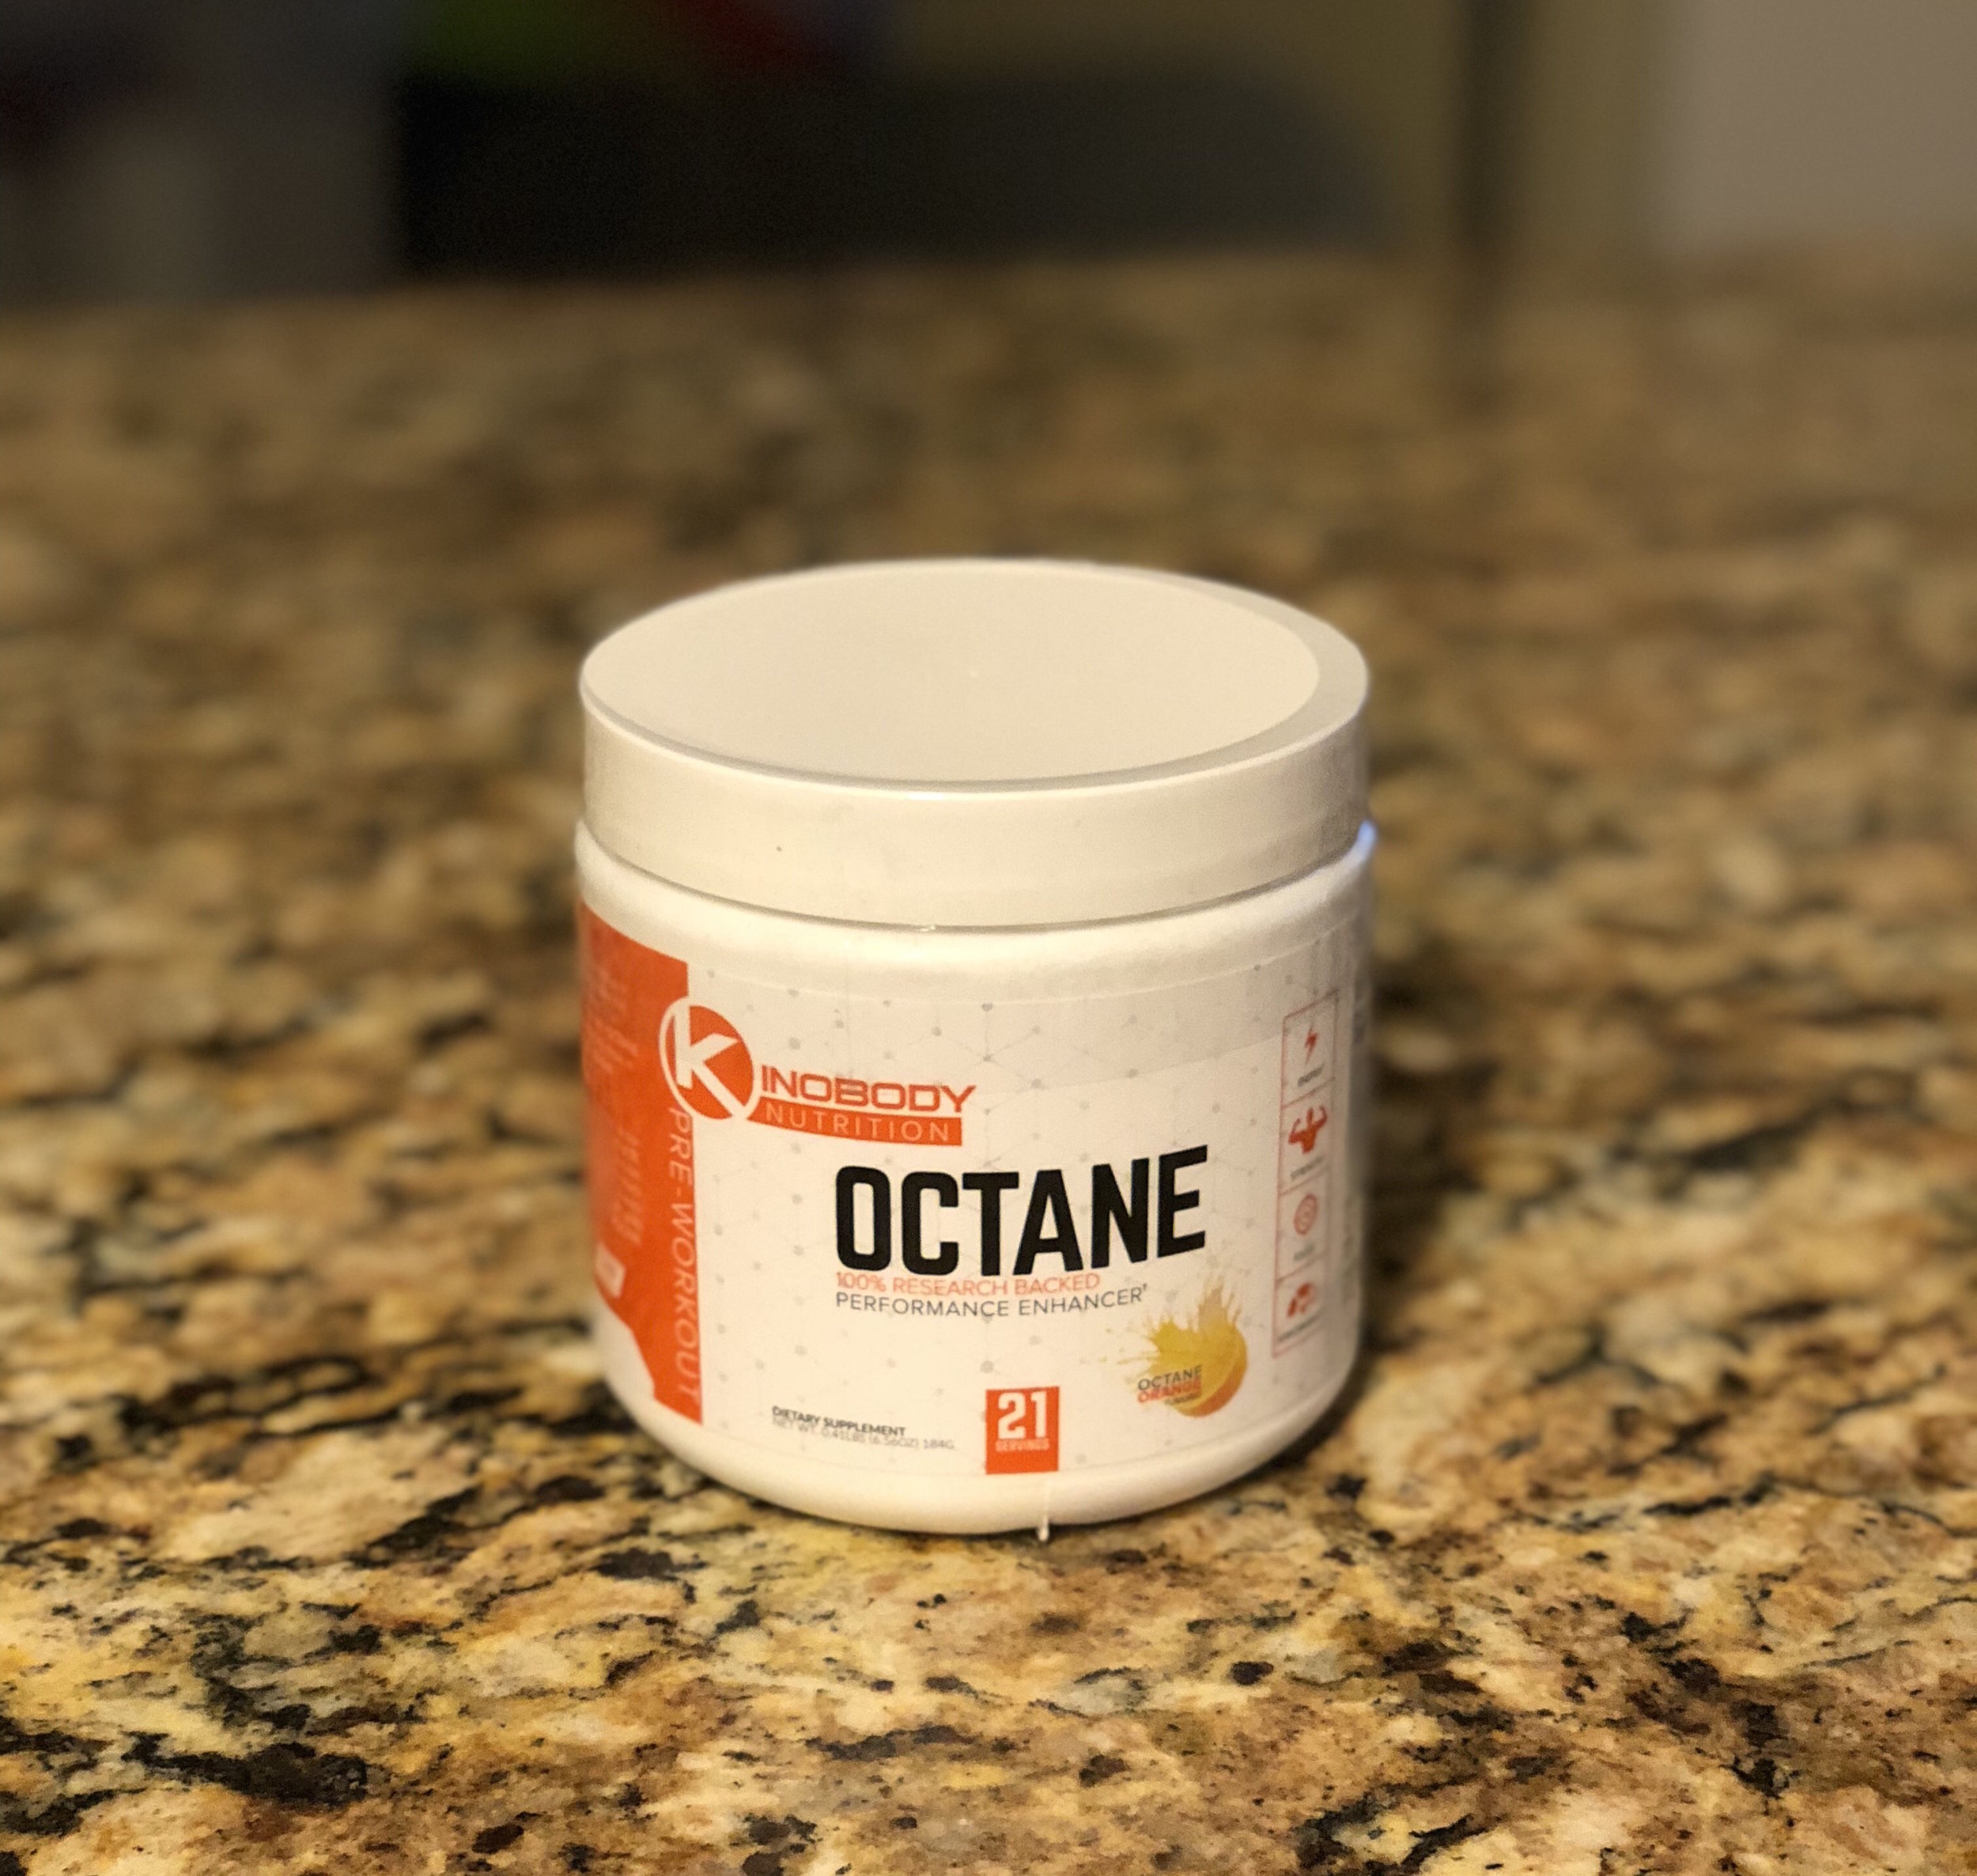 Simple Kino octane pre workout for Challenge